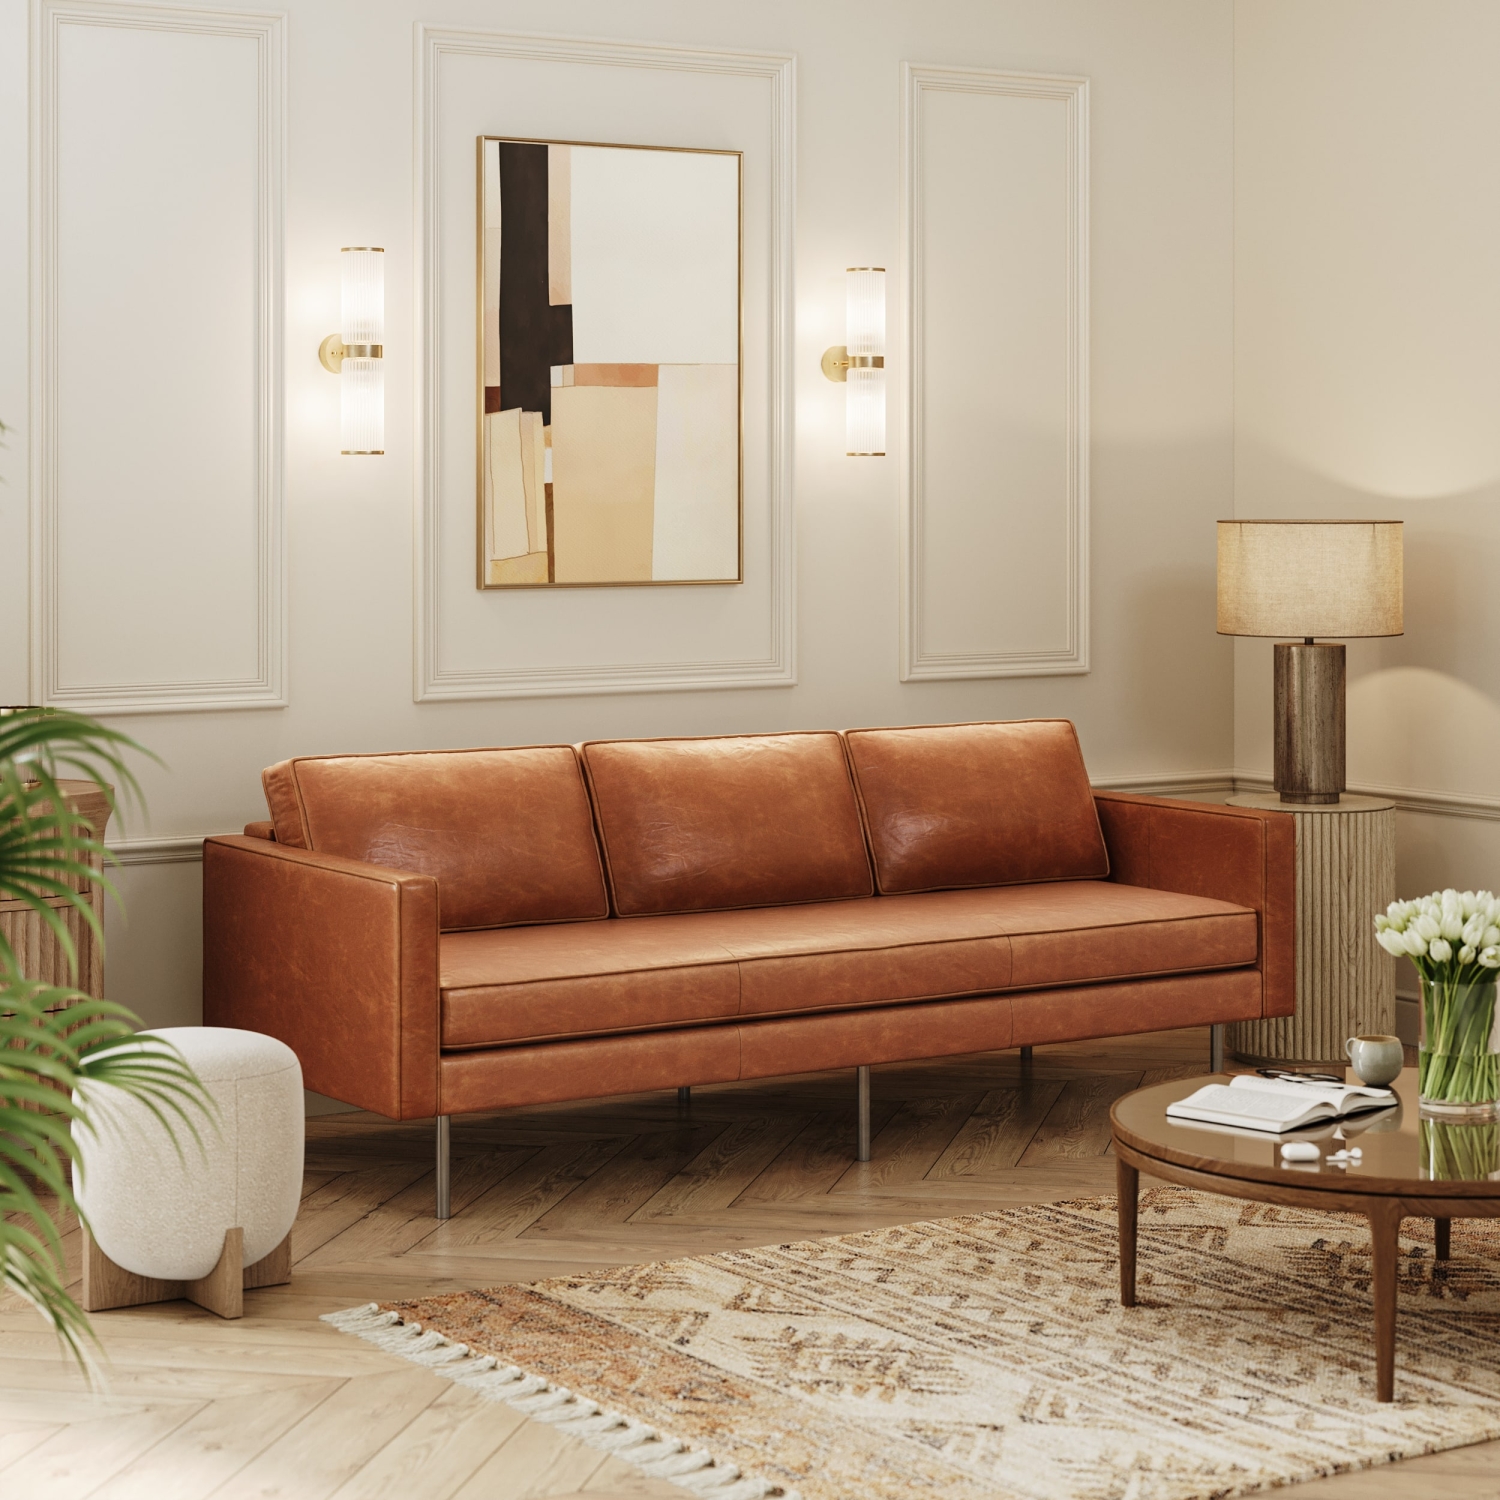 Lifestyle Render for a Brown Sofa